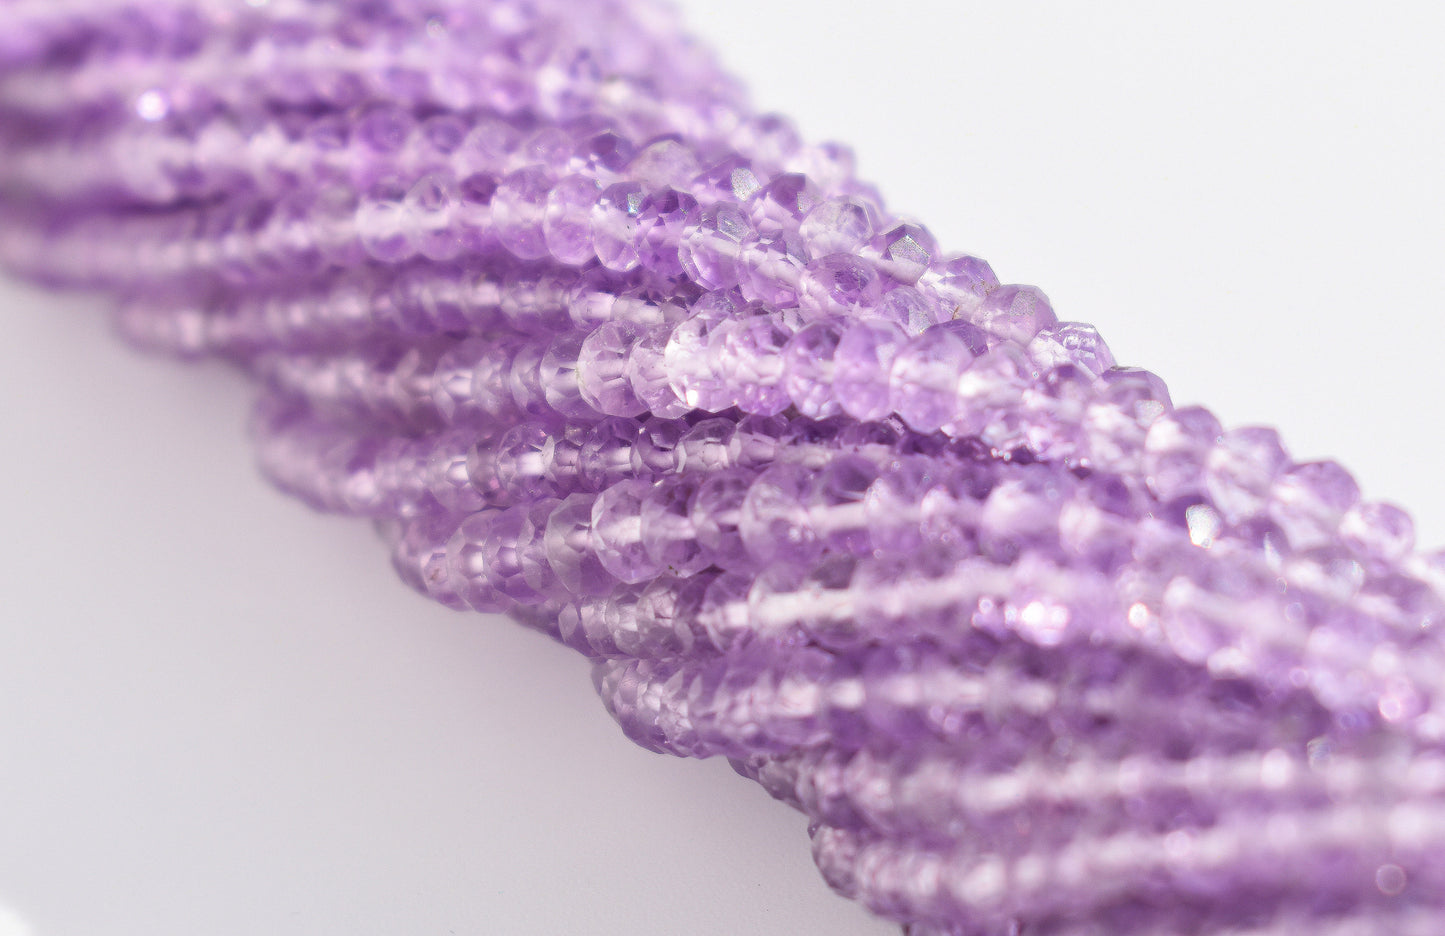 Amethyst Faceted Rondelle Beads 3-4mm